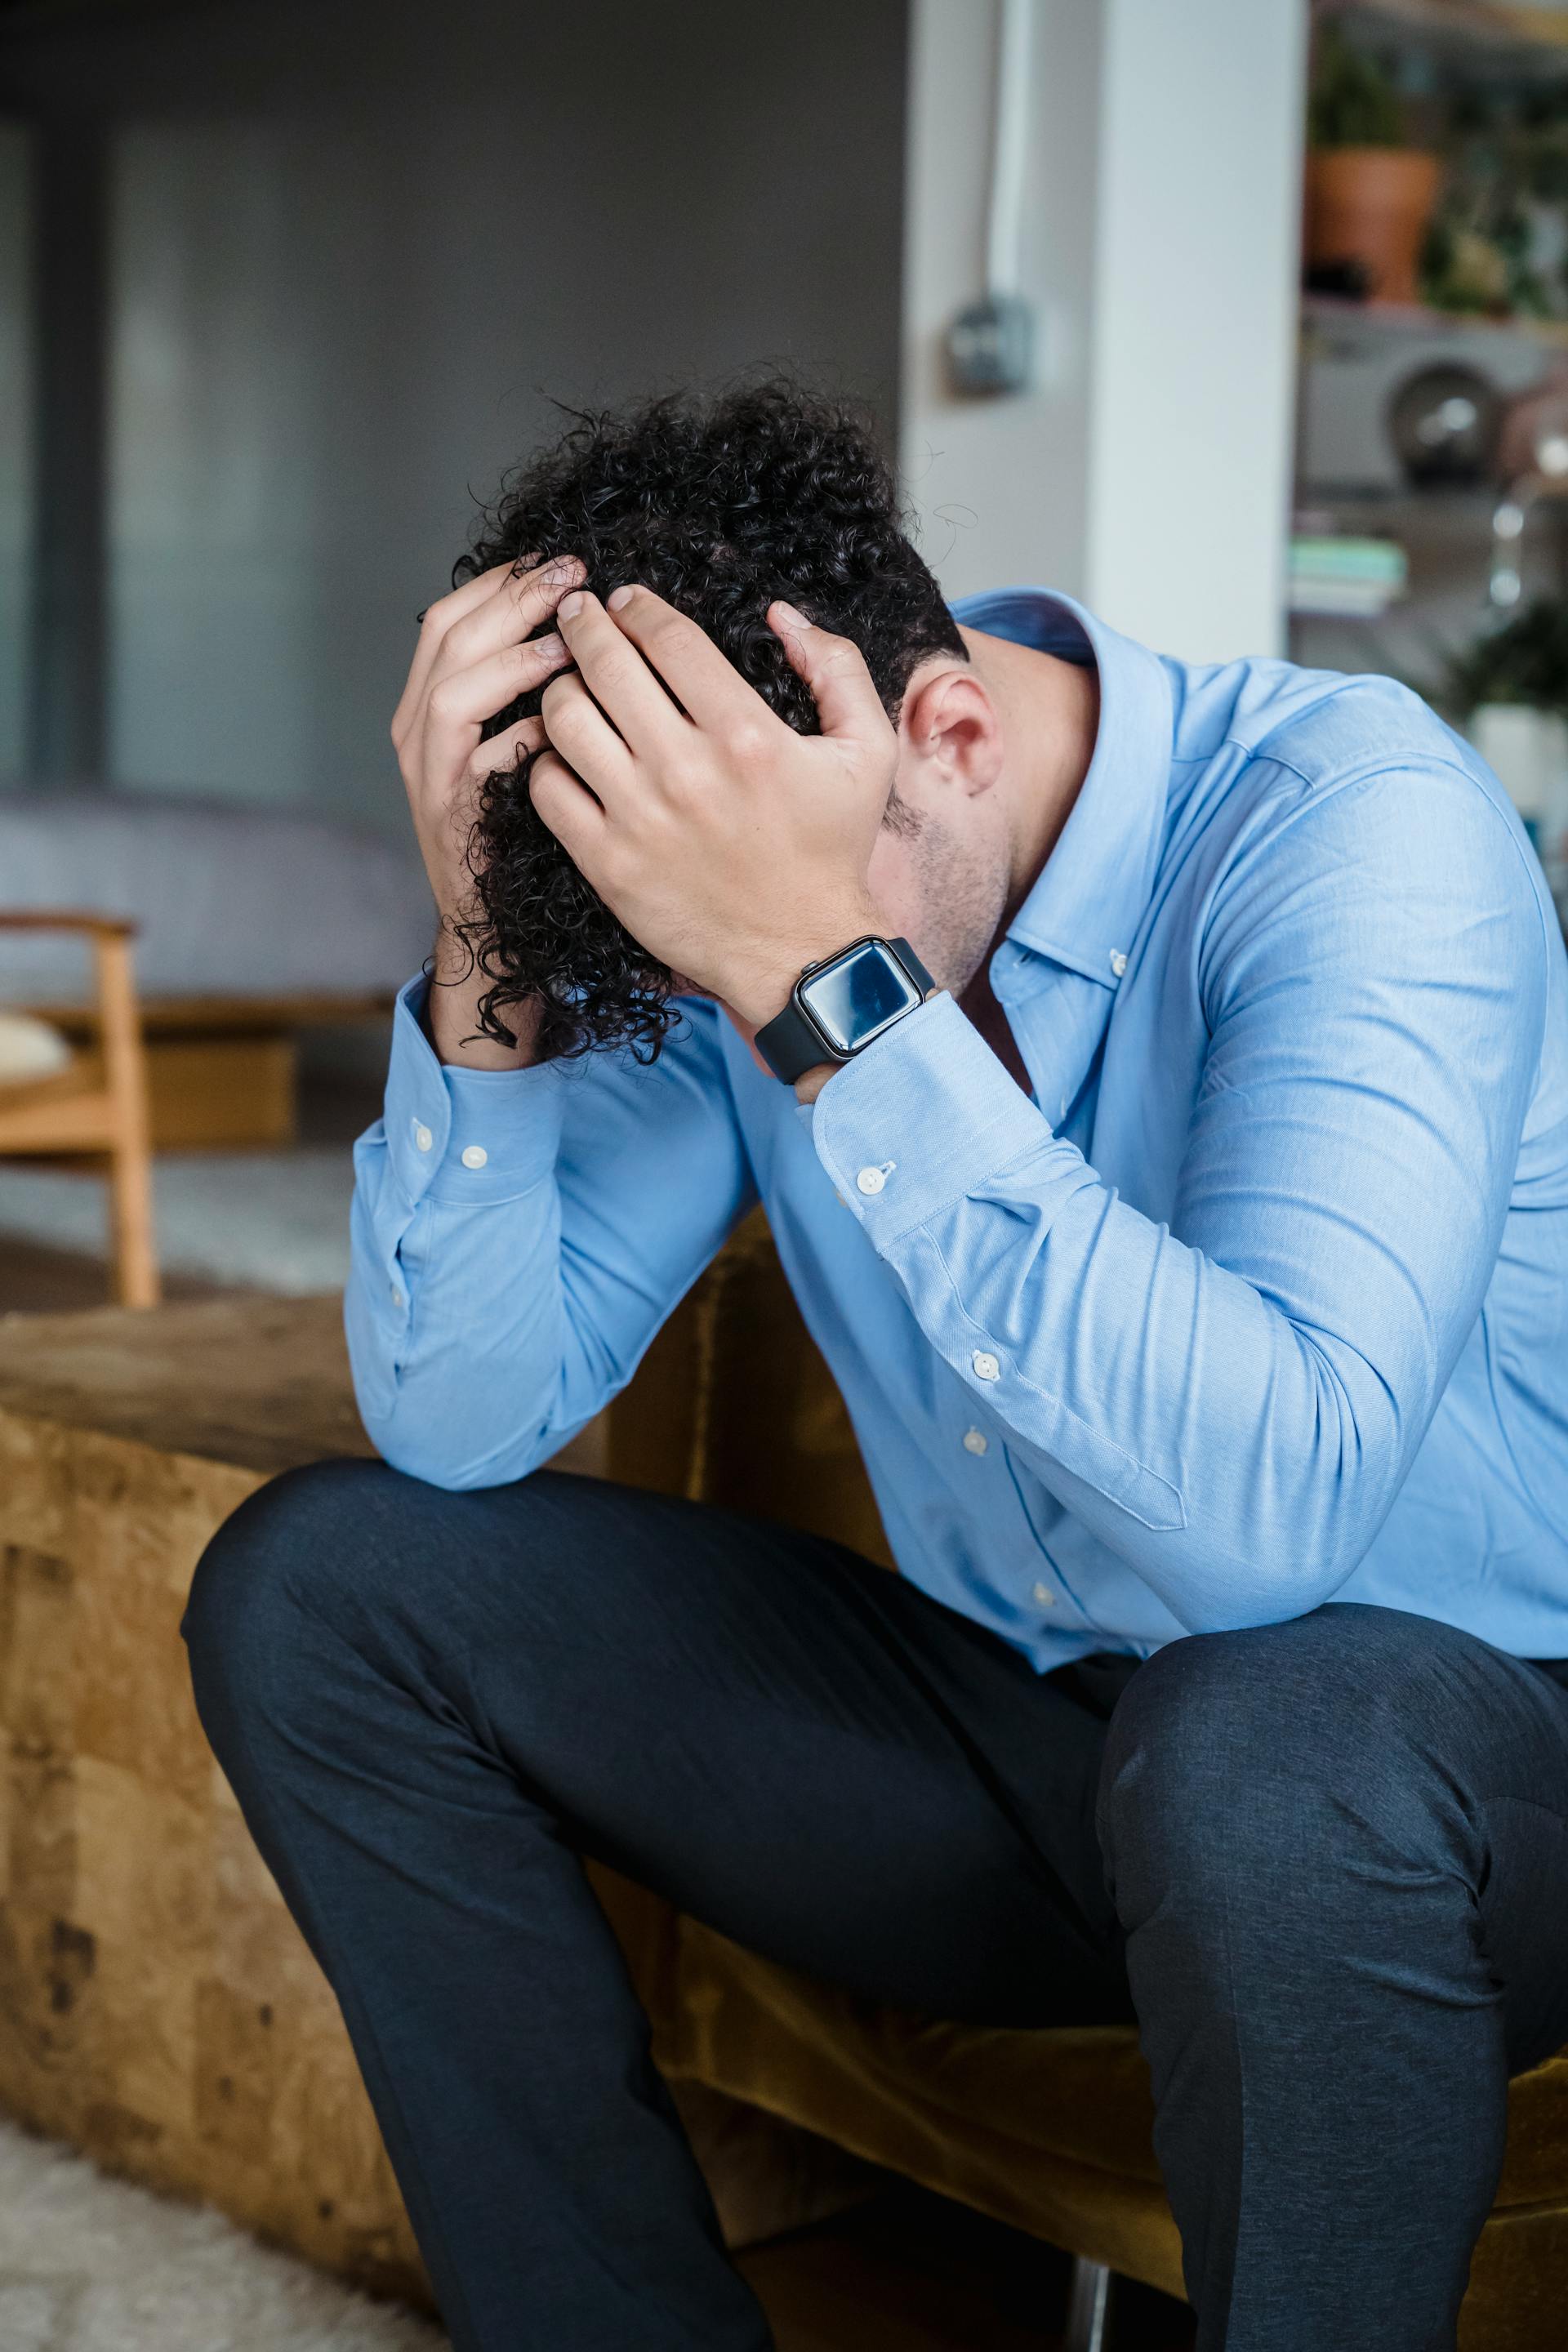 An embarrassed man holding his head | Source: Pexels